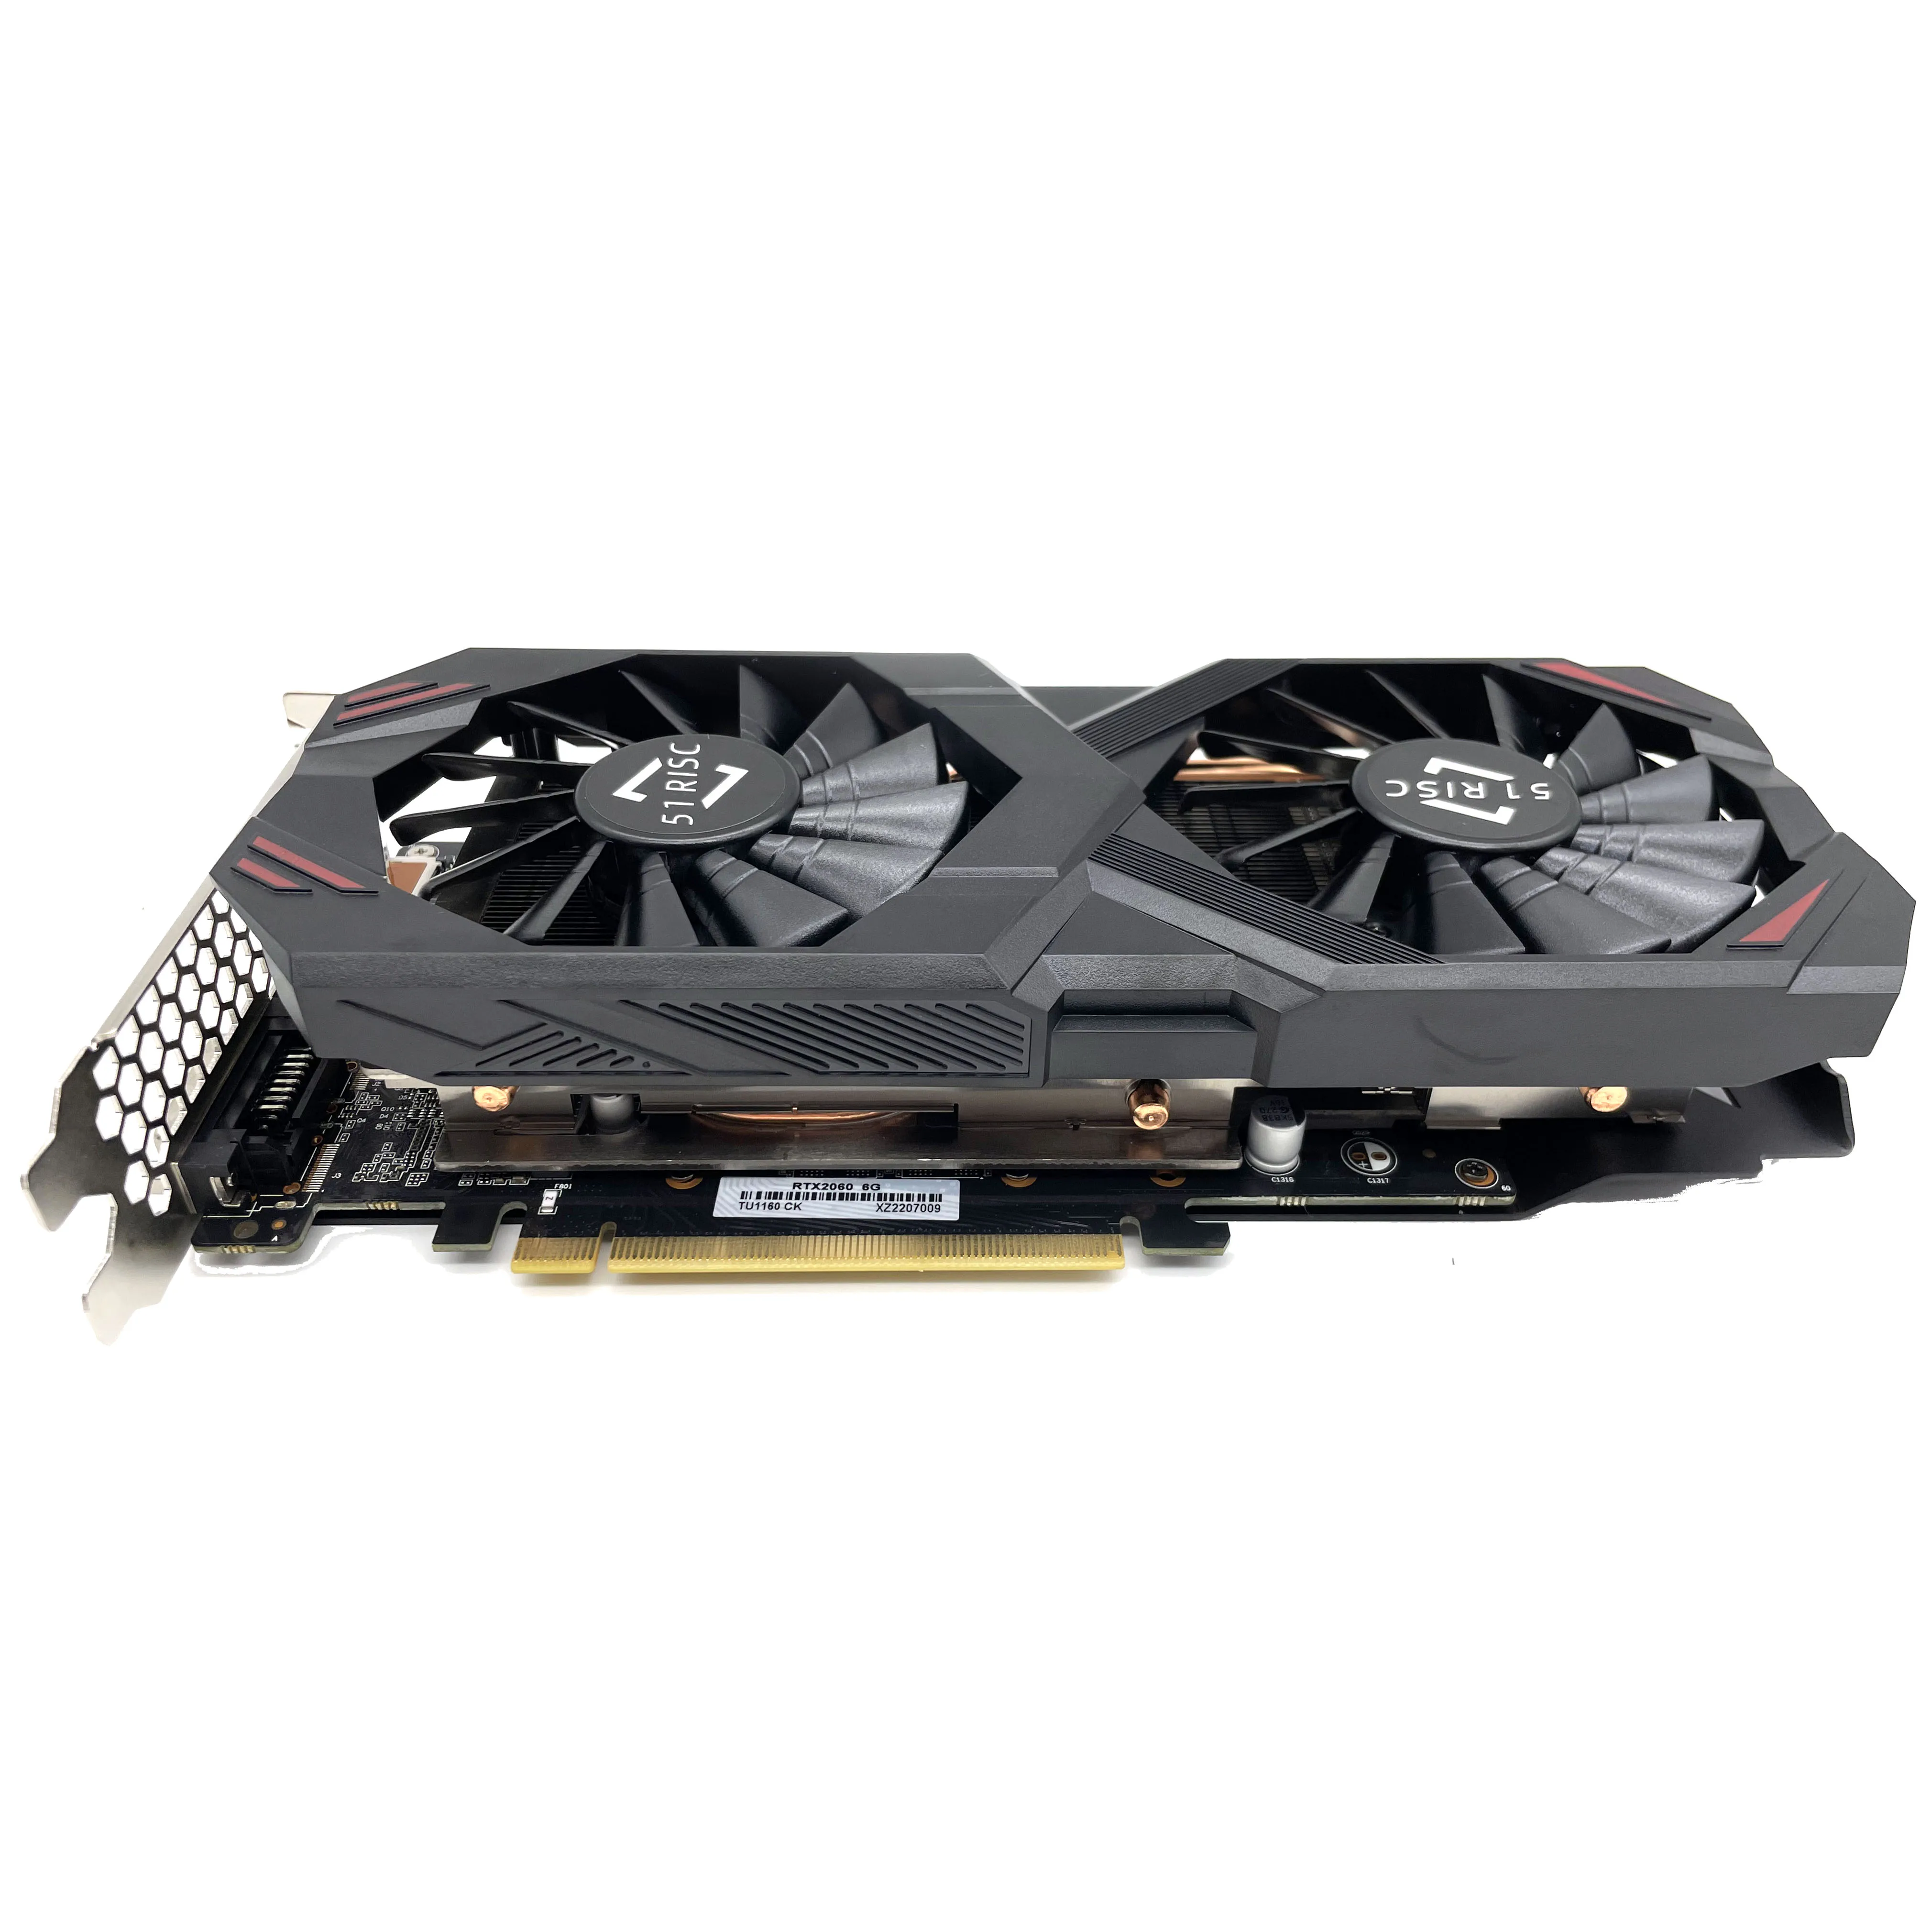 SHELI 51RISC GeForce RTX 2060 6GB GDDR6 PCIE16 Graphics Cards RTX2060 6G  for Computer office Components video Cards gaming